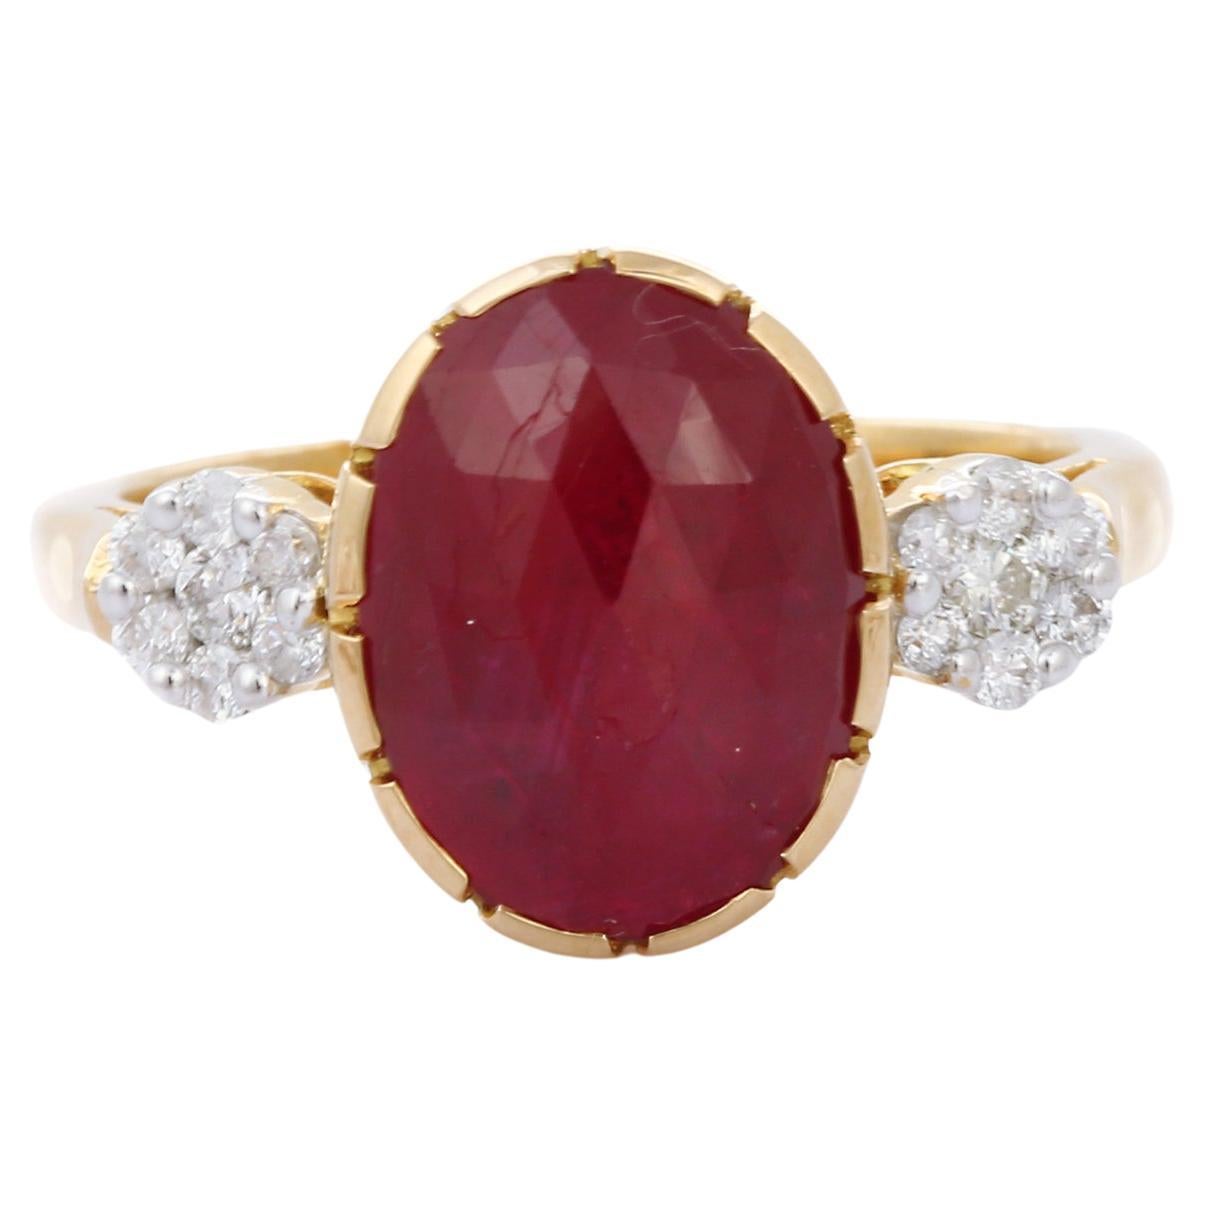 2.92 Carat Red Ruby and Diamond Engagement Ring in 18K Yellow Gold 